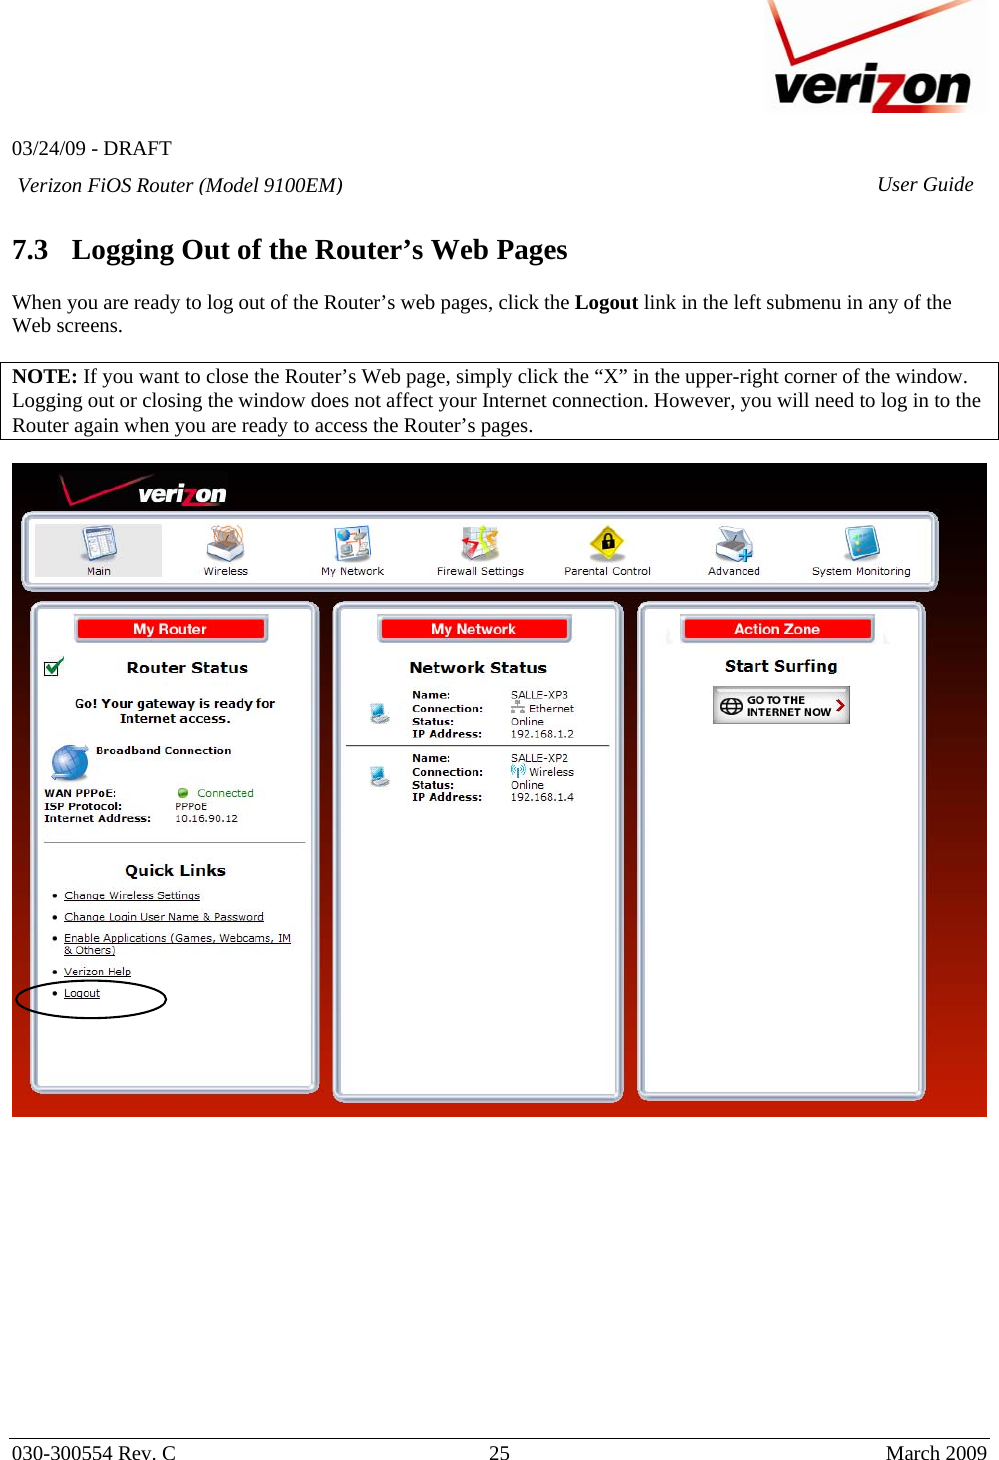   03/24/09 - DRAFT   030-300554 Rev. C  25      March 2009  Verizon FiOS Router (Model 9100EM) User Guide 7.3 Logging Out of the Router’s Web Pages  When you are ready to log out of the Router’s web pages, click the Logout link in the left submenu in any of the Web screens.   NOTE: If you want to close the Router’s Web page, simply click the “X” in the upper-right corner of the window. Logging out or closing the window does not affect your Internet connection. However, you will need to log in to the Router again when you are ready to access the Router’s pages.   